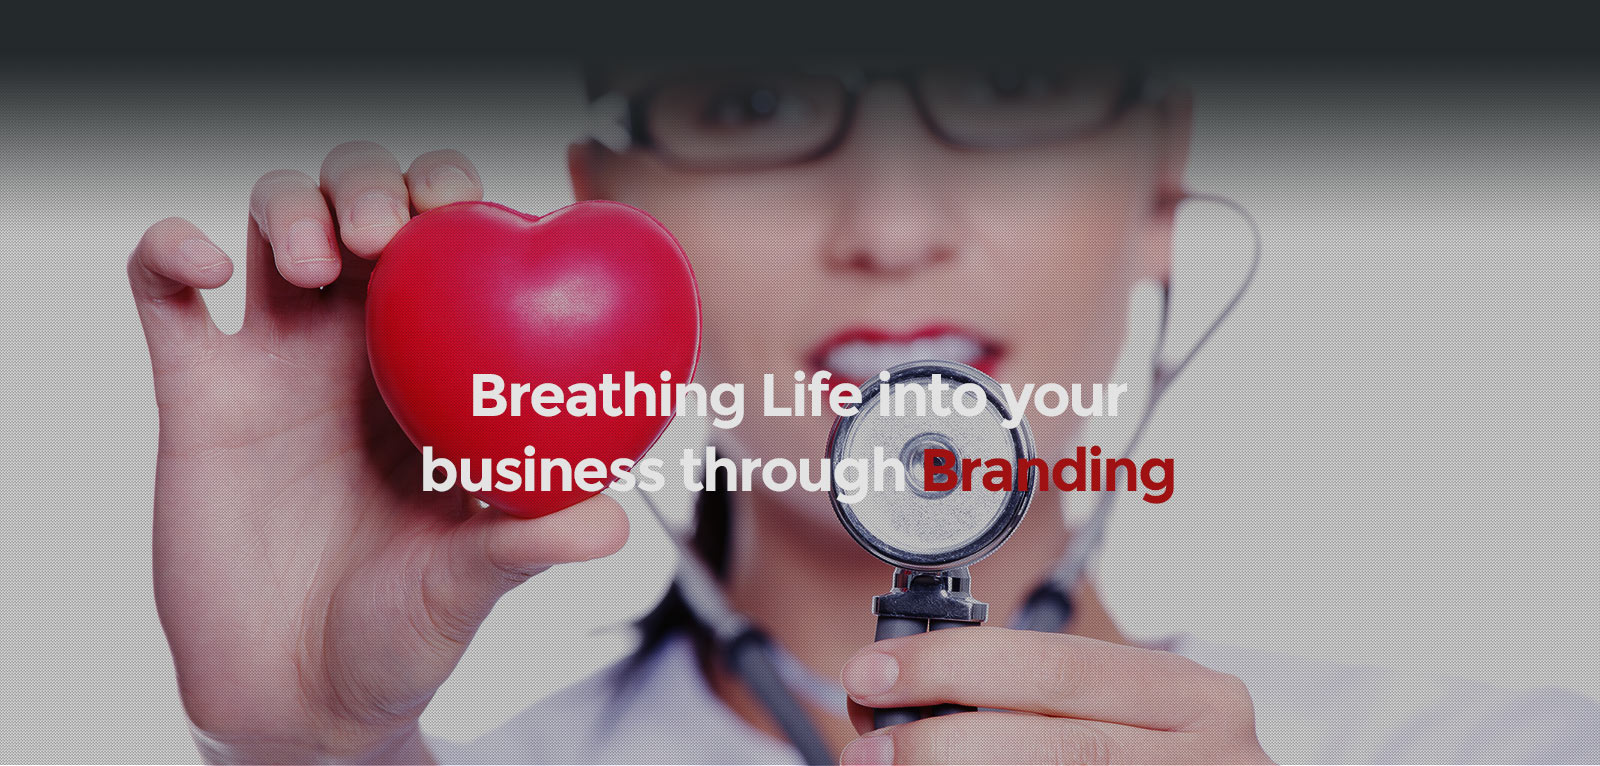 Breathing Life into your business through Branding